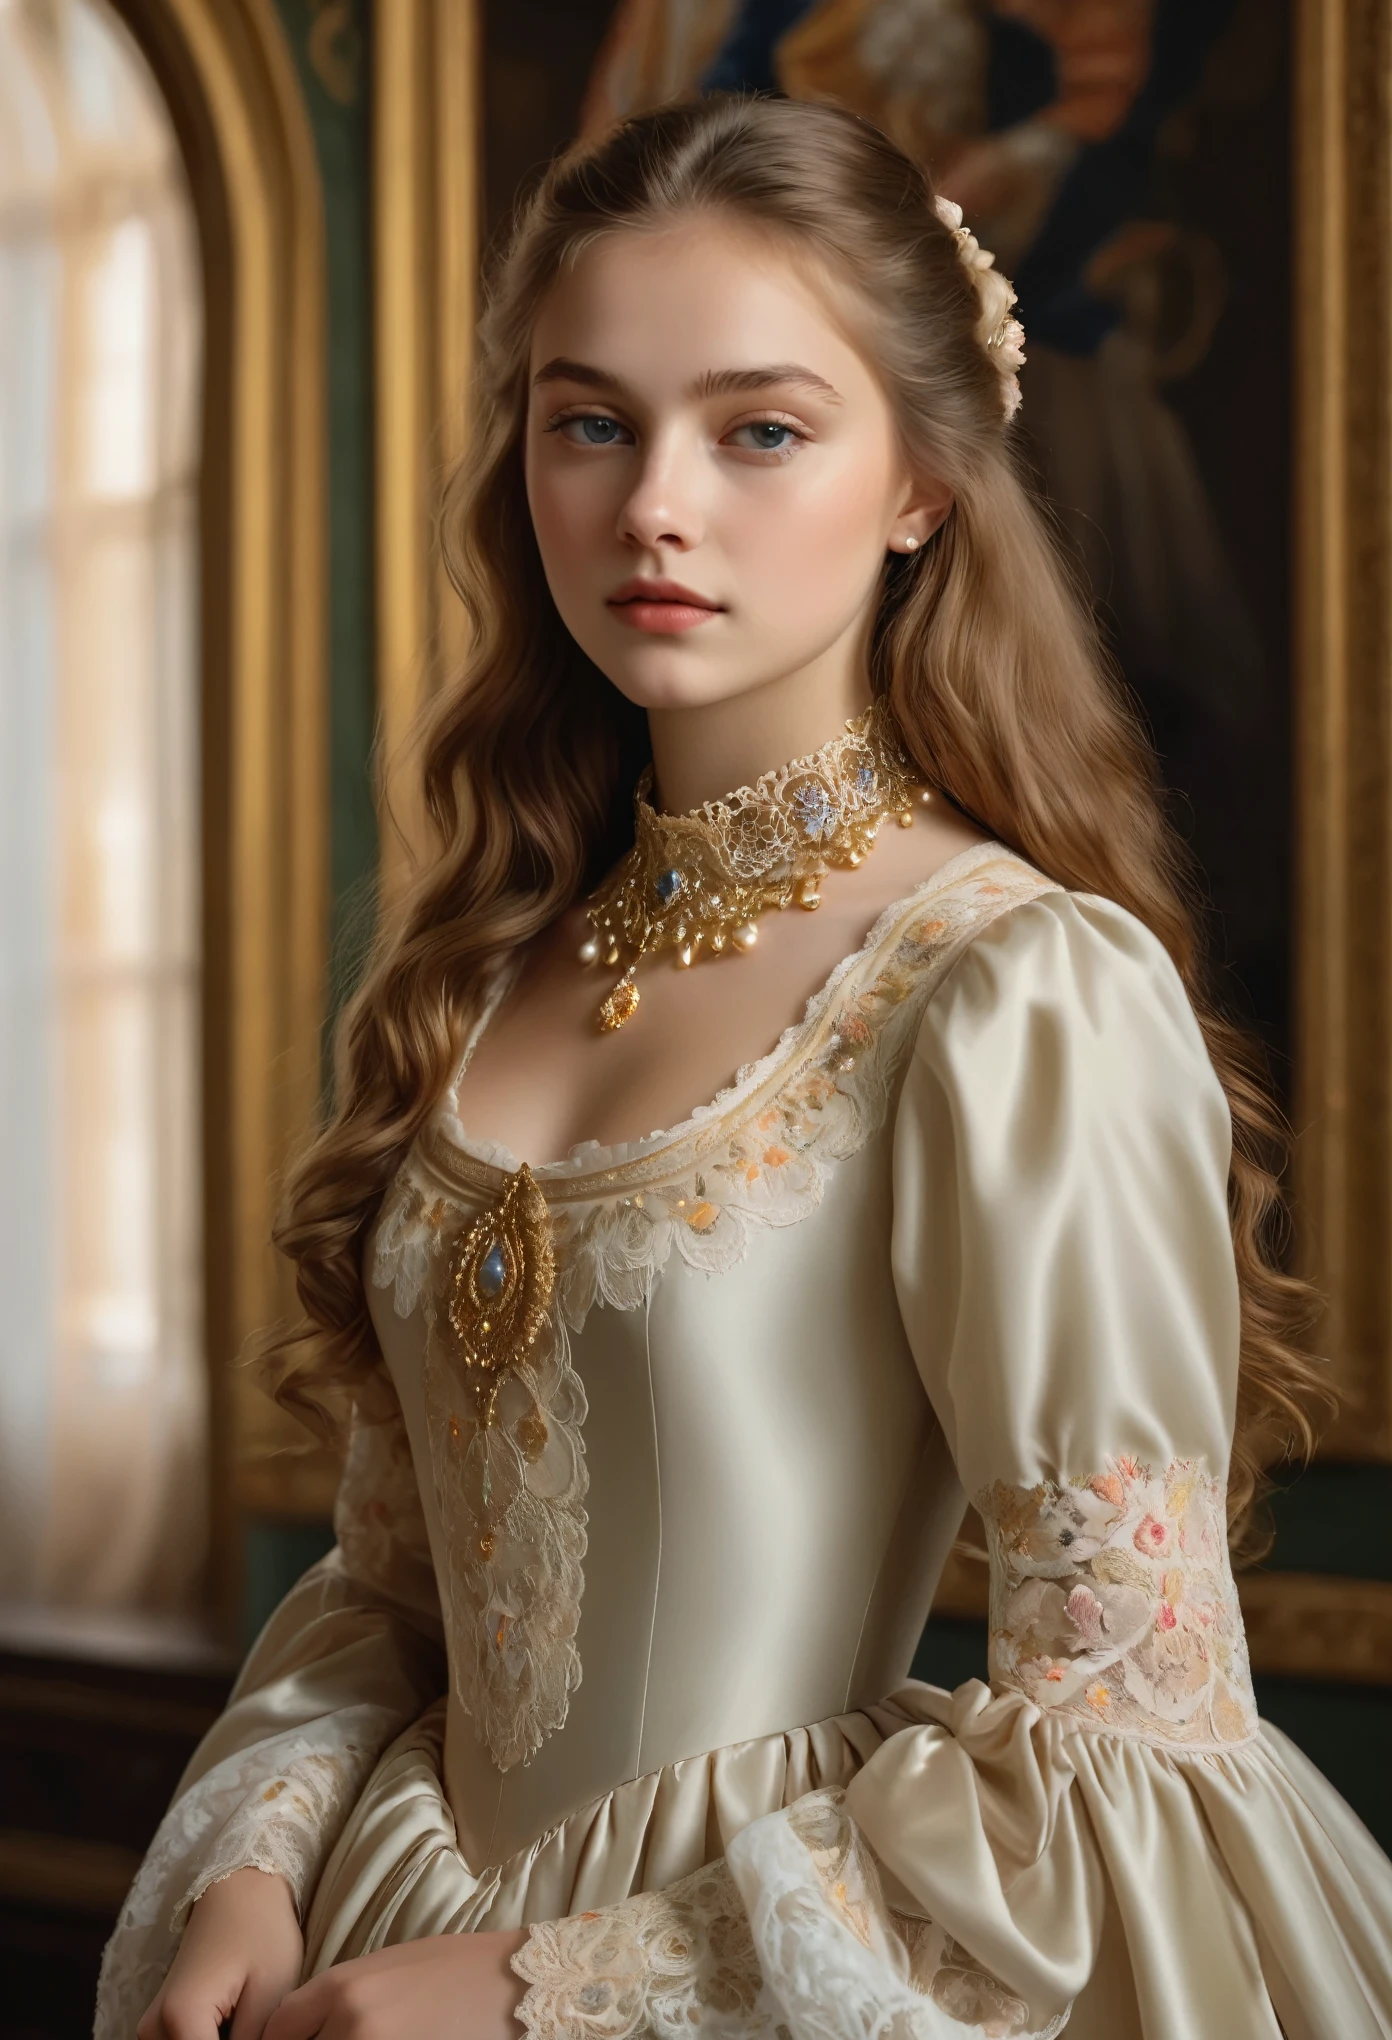 (best quality,4k,8k,highres,masterpiece:1.2),ultra-detailed,(realistic,photorealistic,photo-realistic:1.37),portrait,painting,pastels,personalized masterpiece,18th century,Russian,aristocratic,girl,noble daughter,14 years old,extremely beautiful,face,expressive eyes,delicate nose,luscious lips,porcelain skin,rosy cheeks,flowing curls,silky dress,stately posture,fine jewelry,embroidered lace collar,grand background,opulent interior,faint golden light